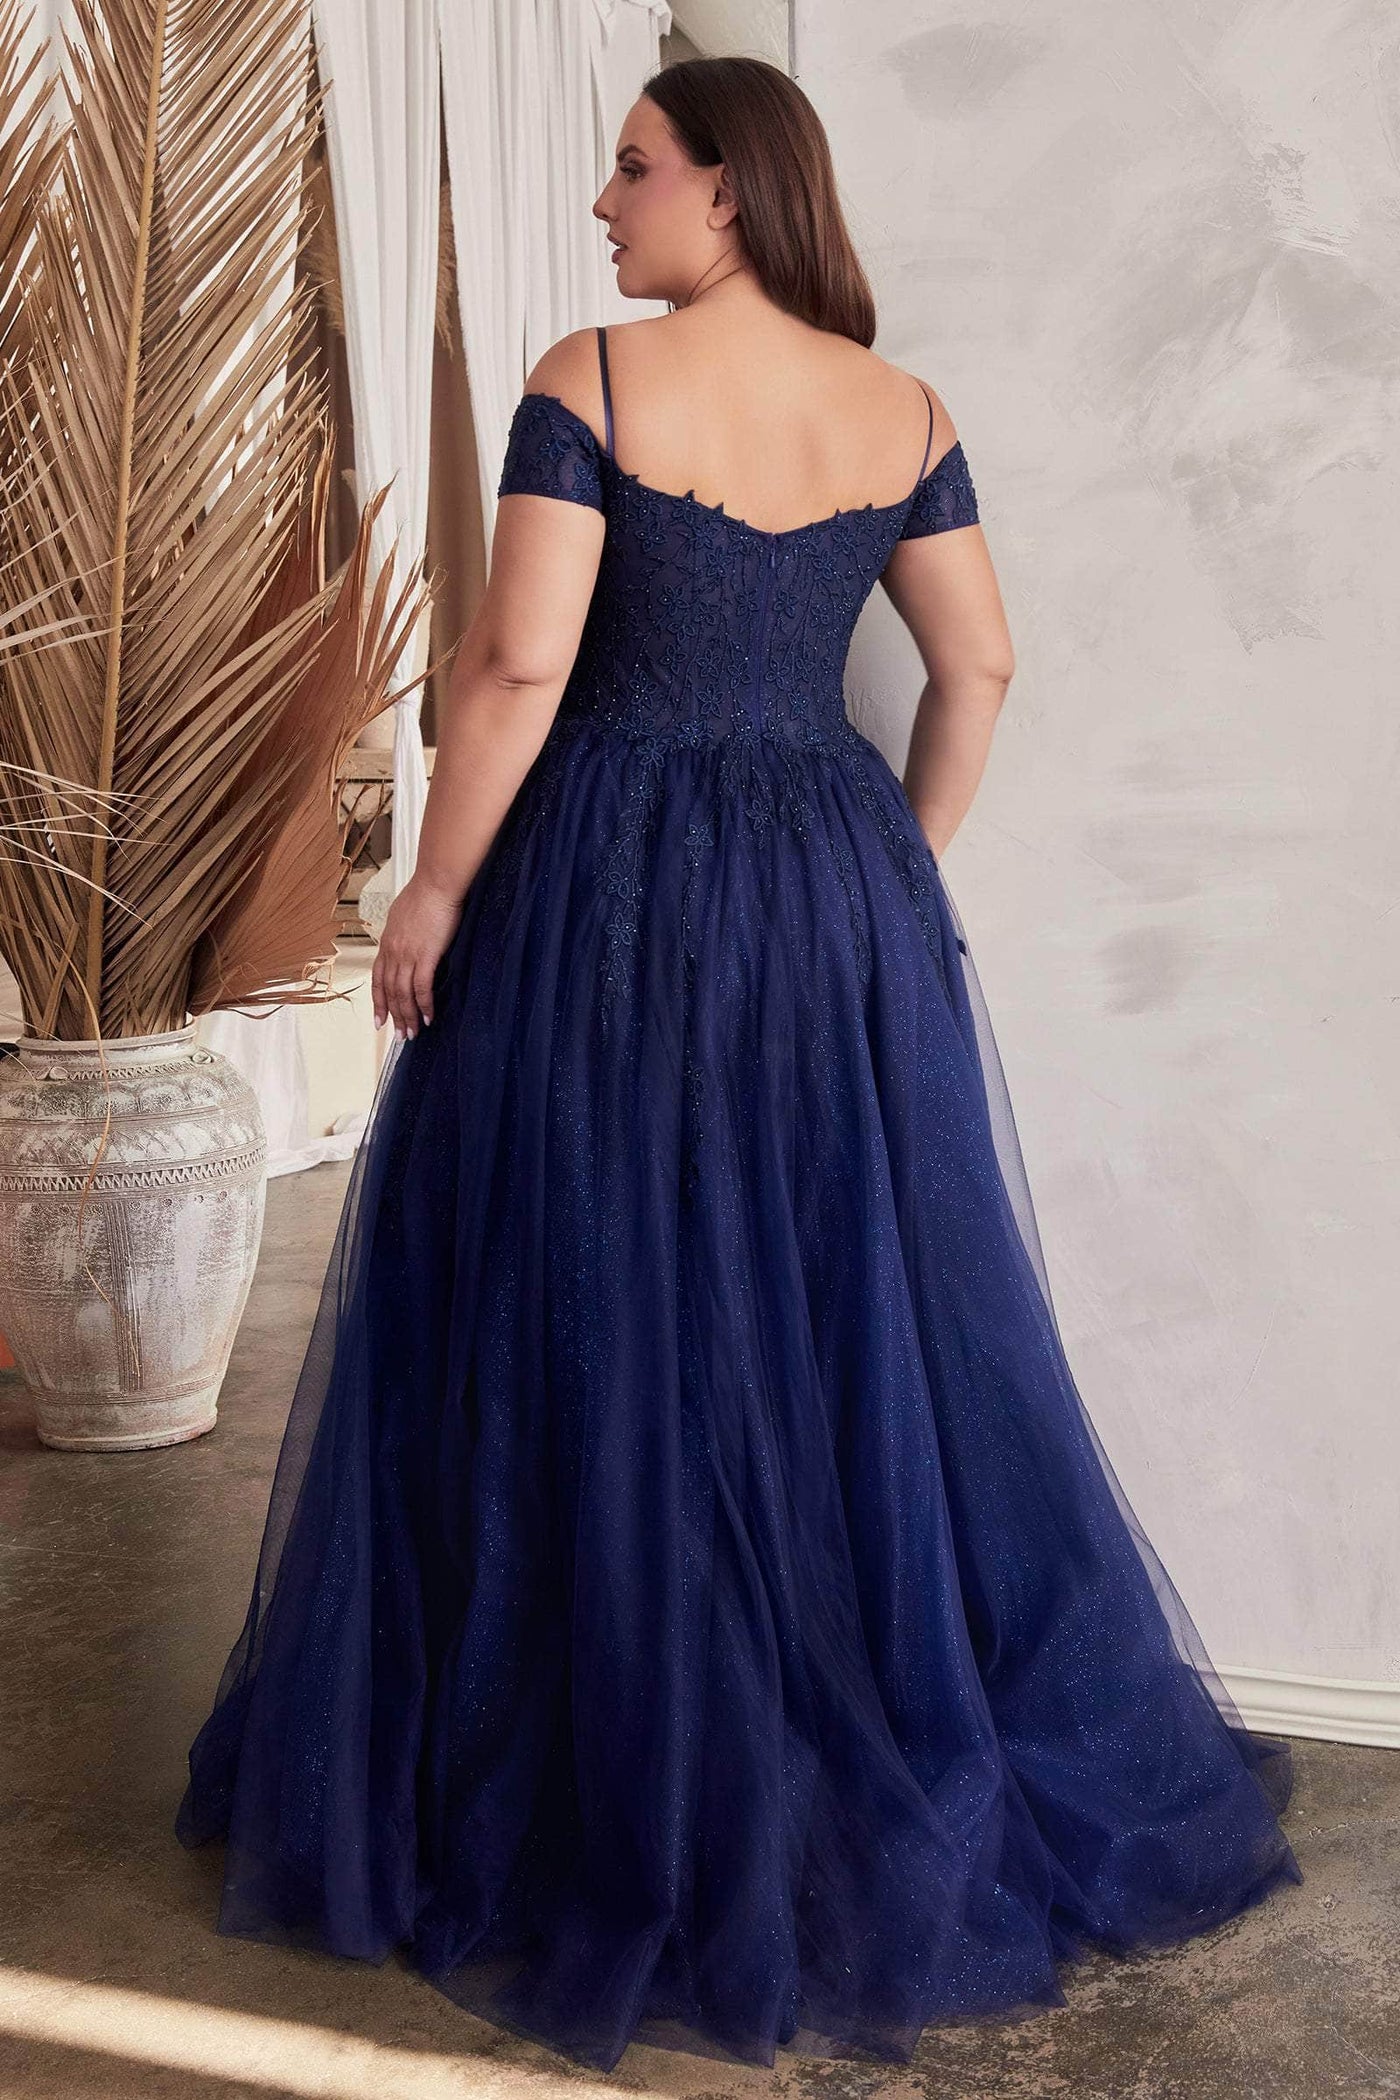 Ladivine C154 - Sweetheart A-Line Prom Gown Special Occasion Dress